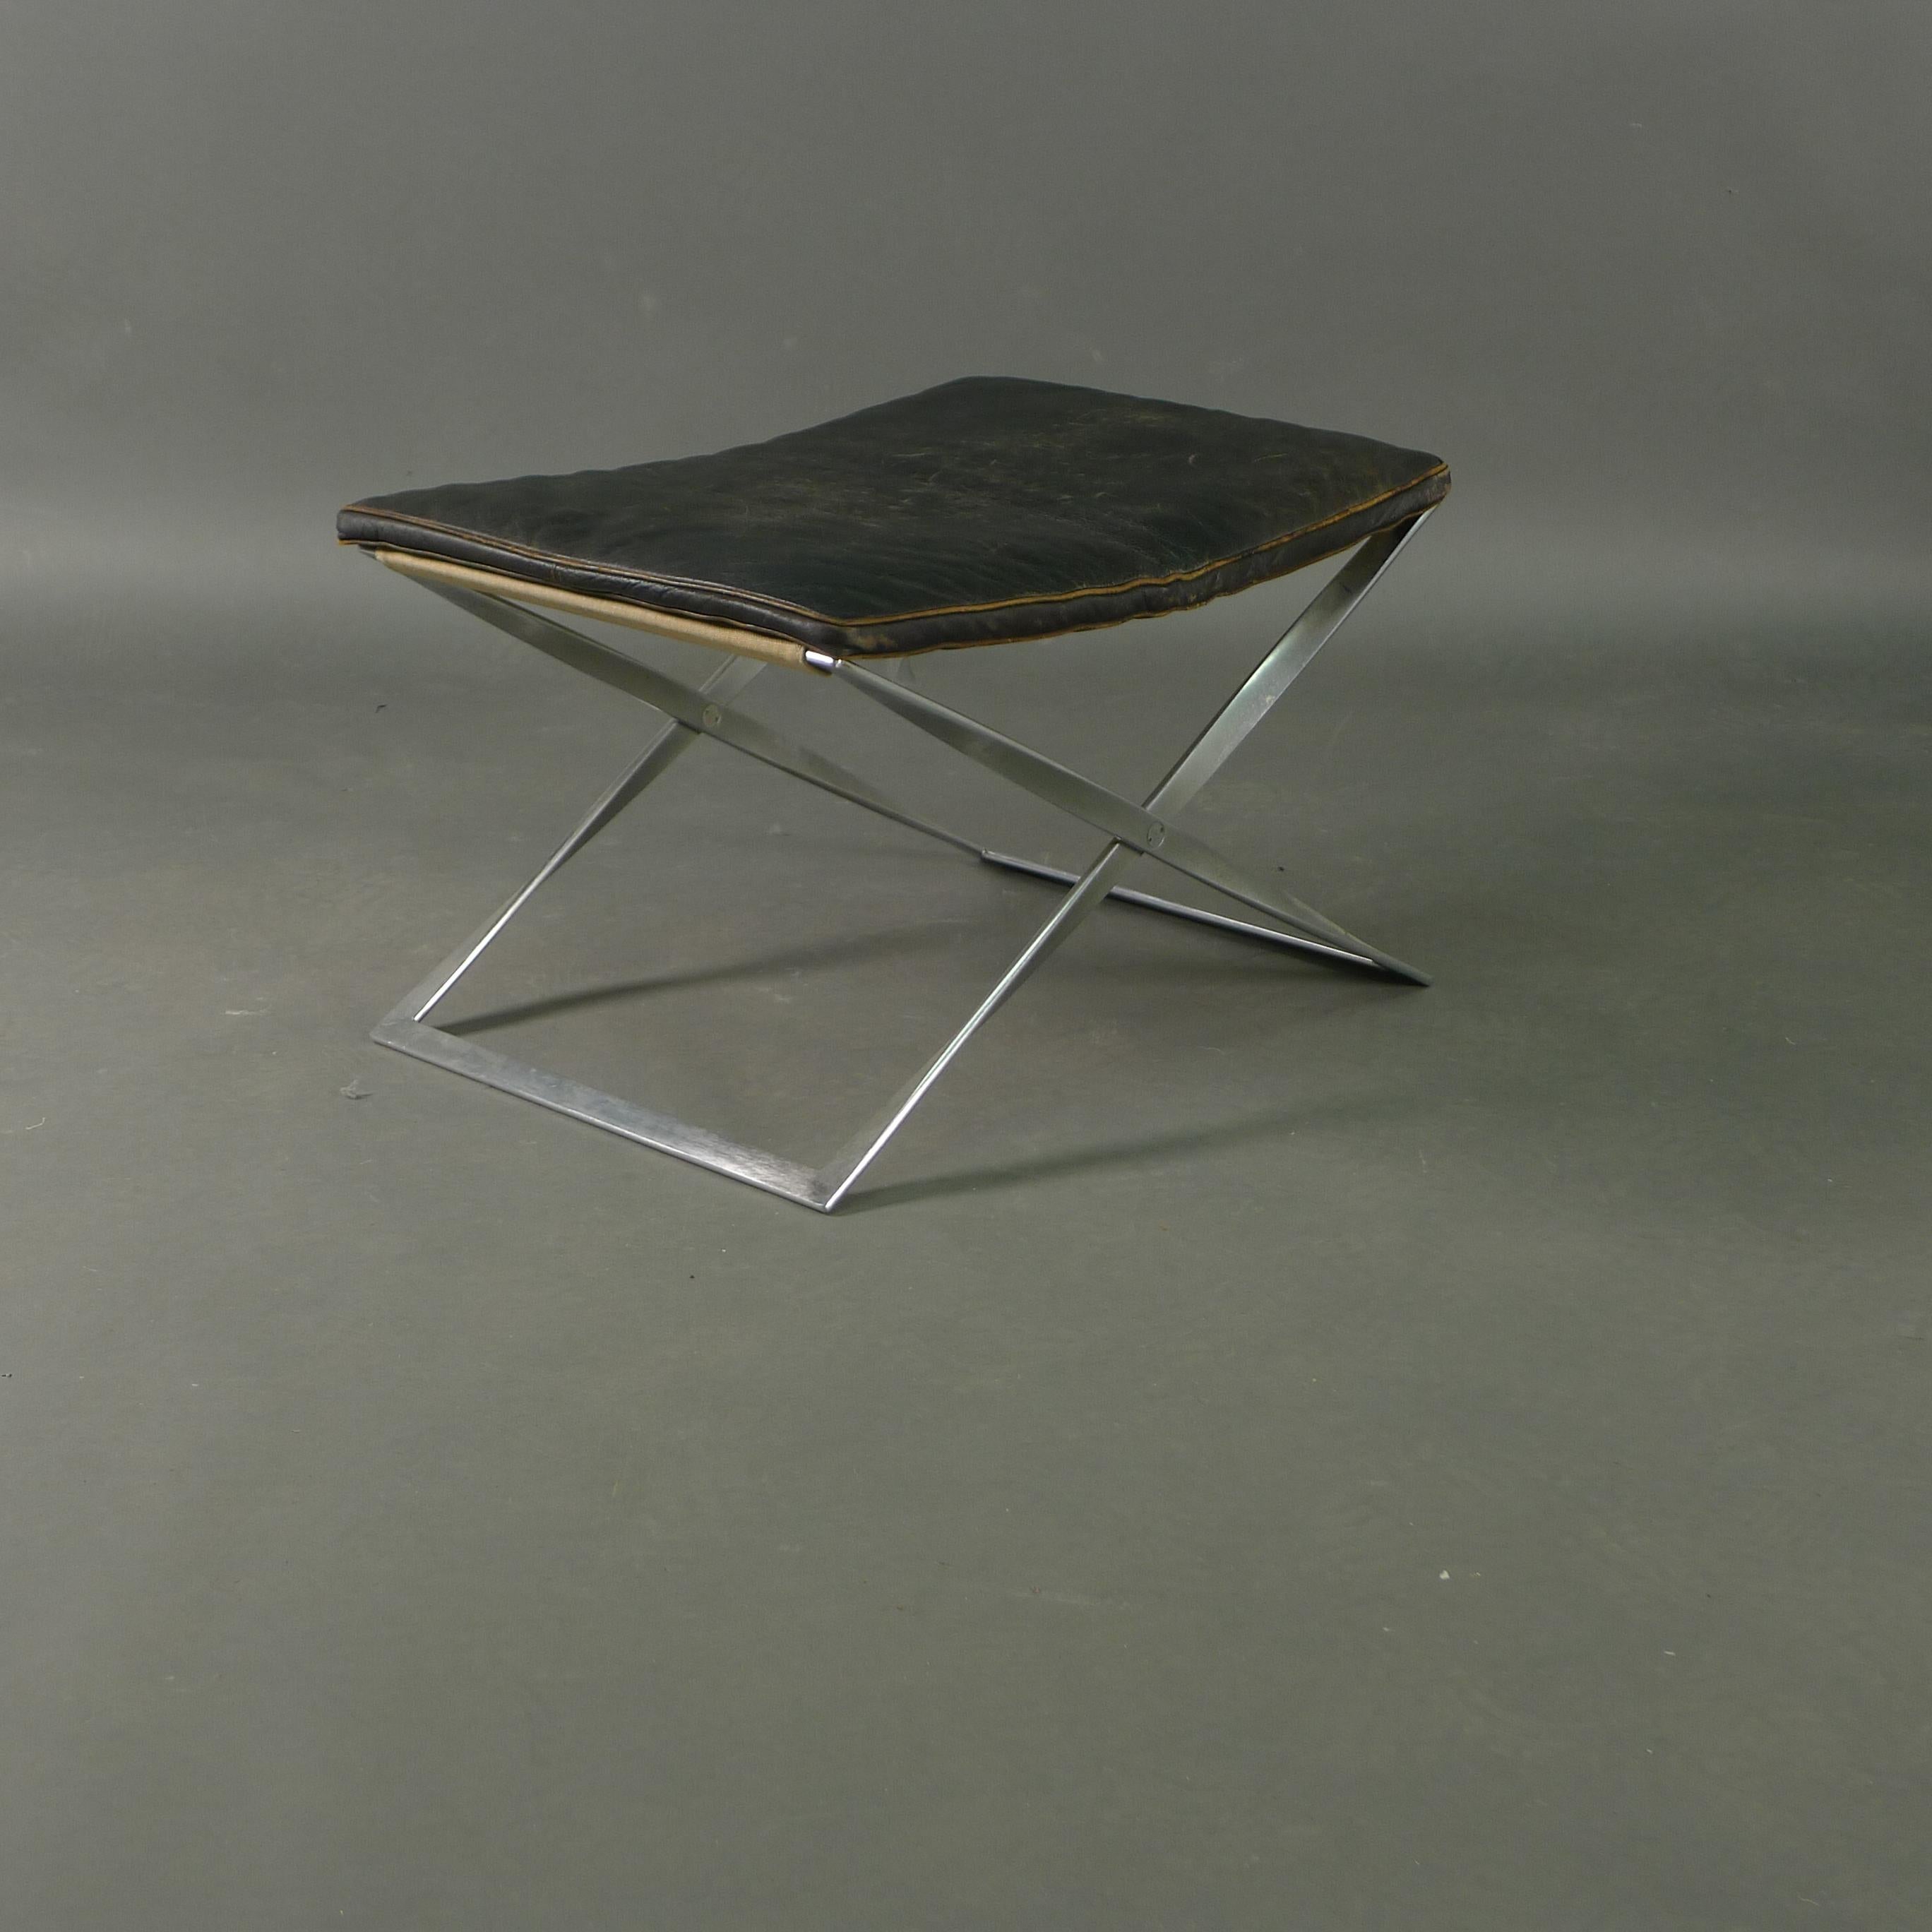 An early PK-91 folding stool in chromed steel with original slung canvas seat and additional loose cushion upholstered in brown leather.  By repute, the cushion is the work of Ivan Schlechter, a leatherworker who upholstered many of Kjaerholm's